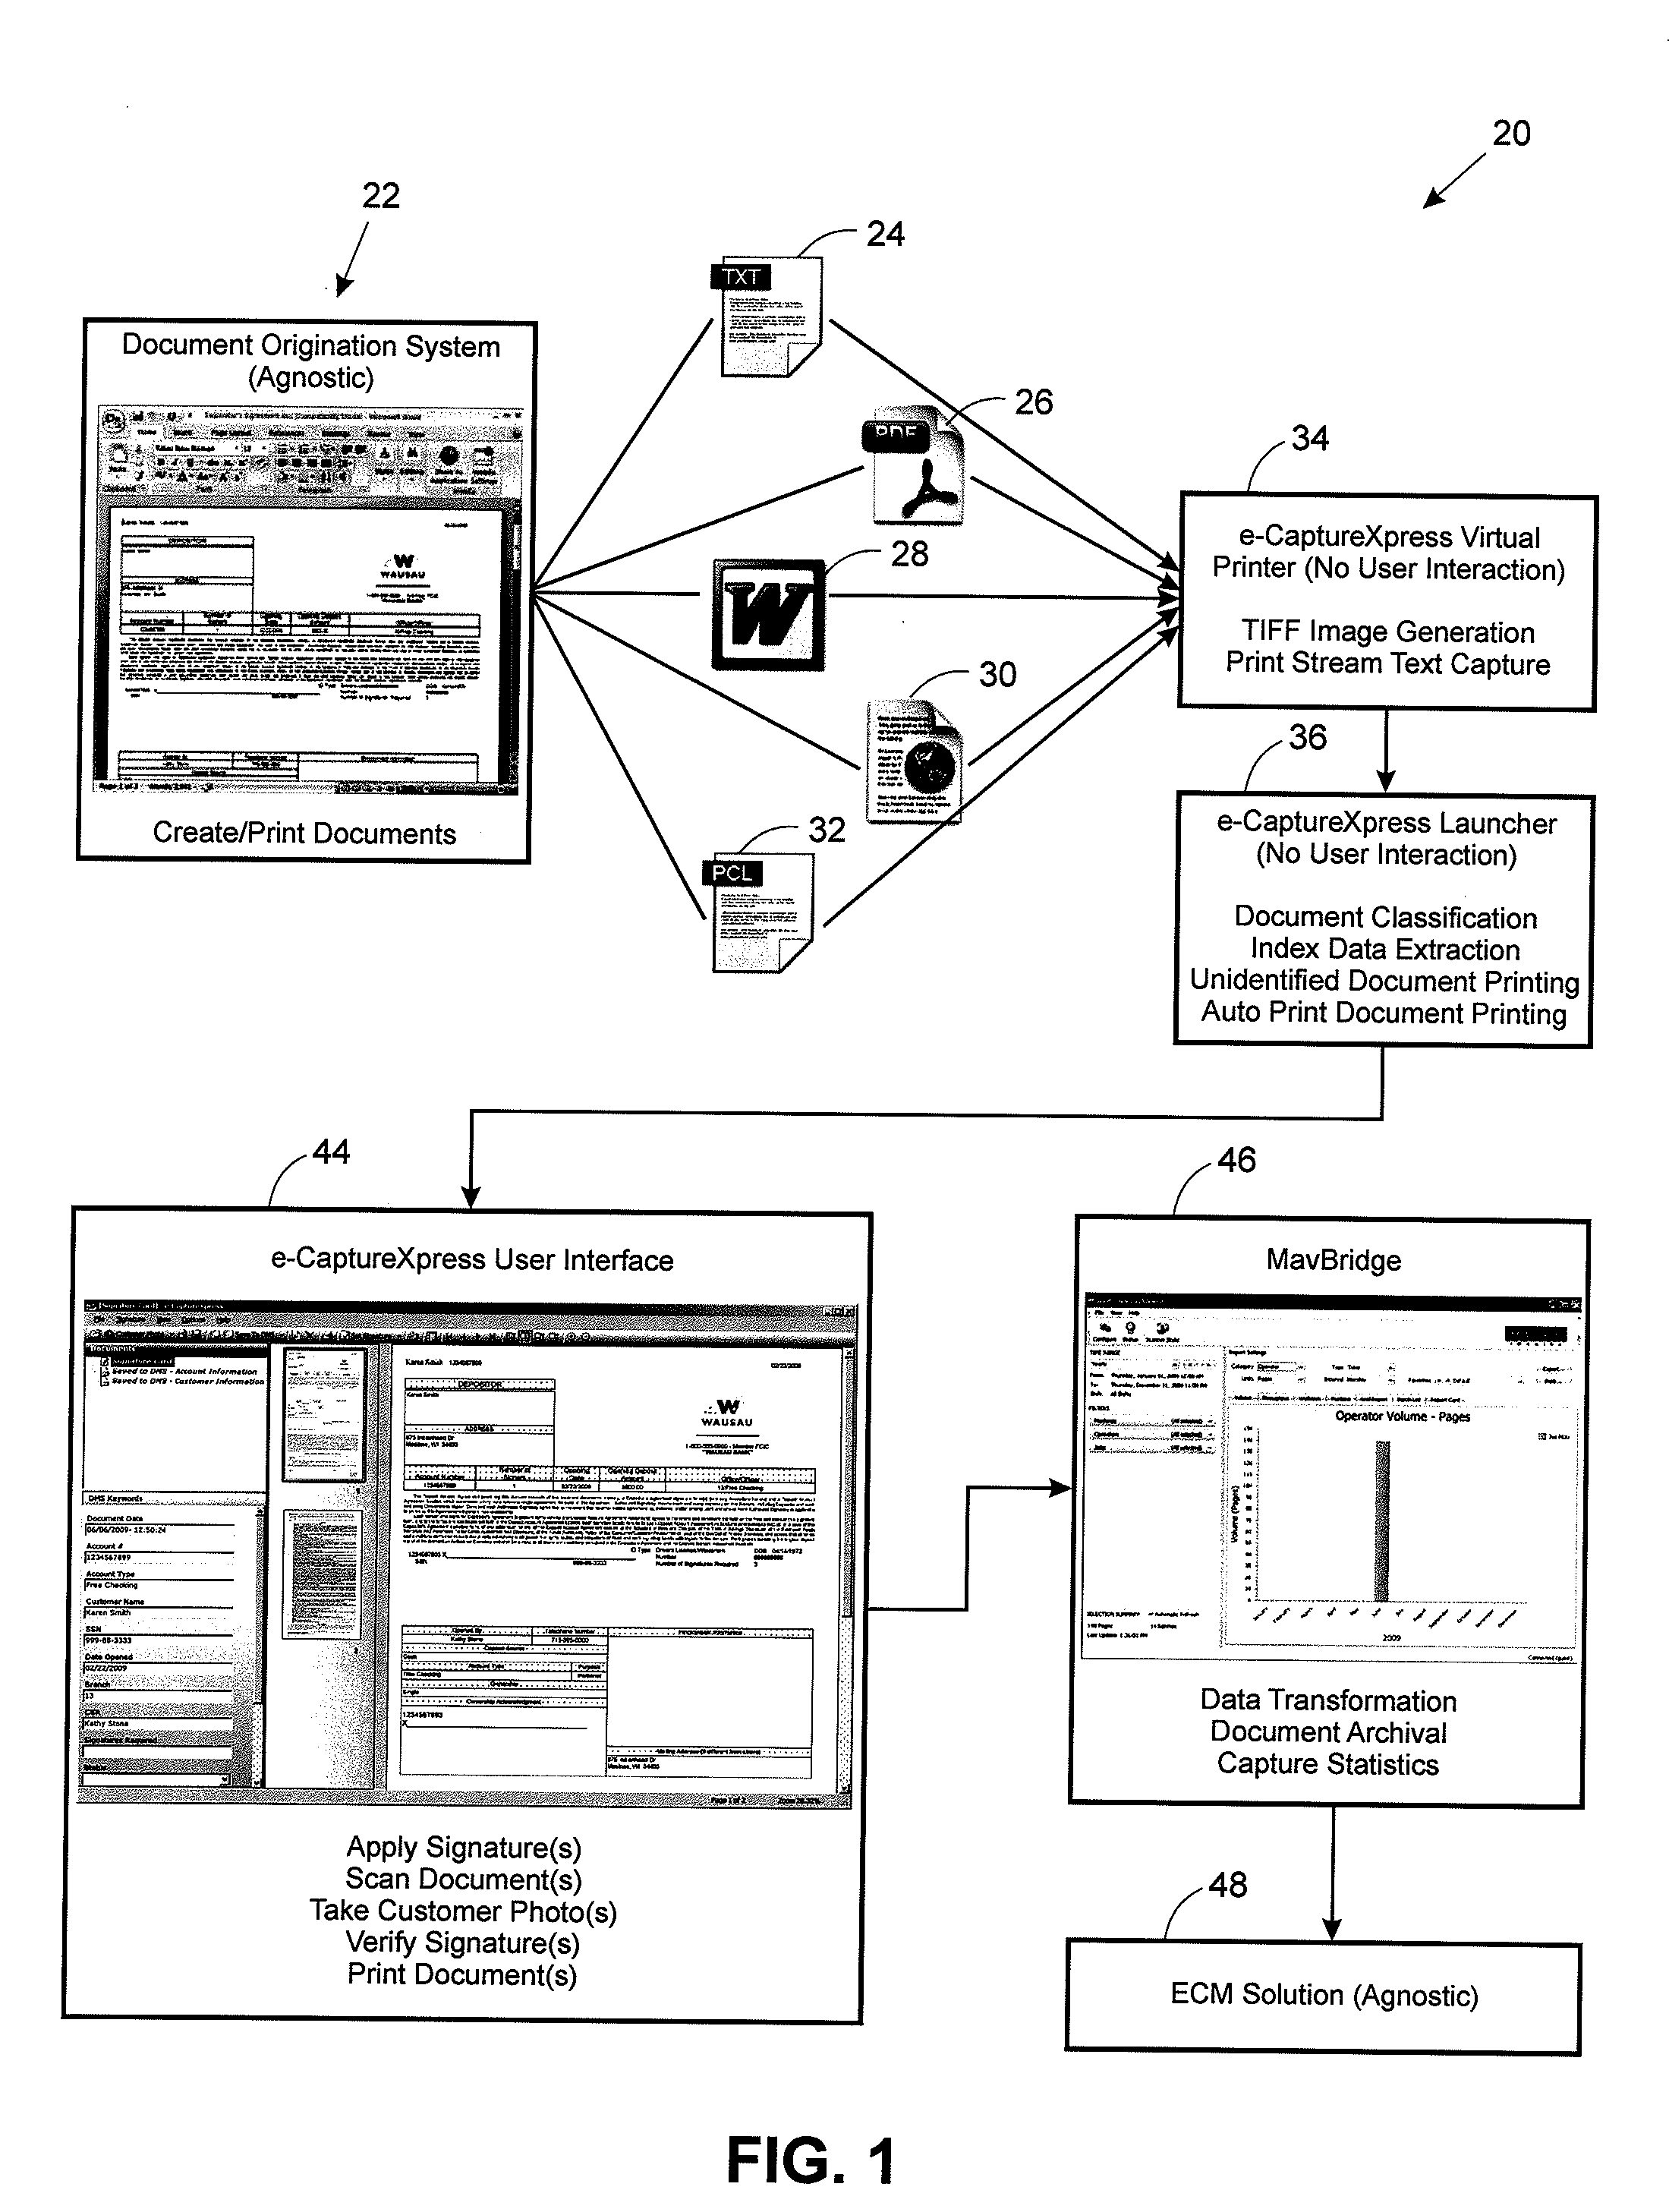 Distributed capture system for use with a legacy enterprise content management system